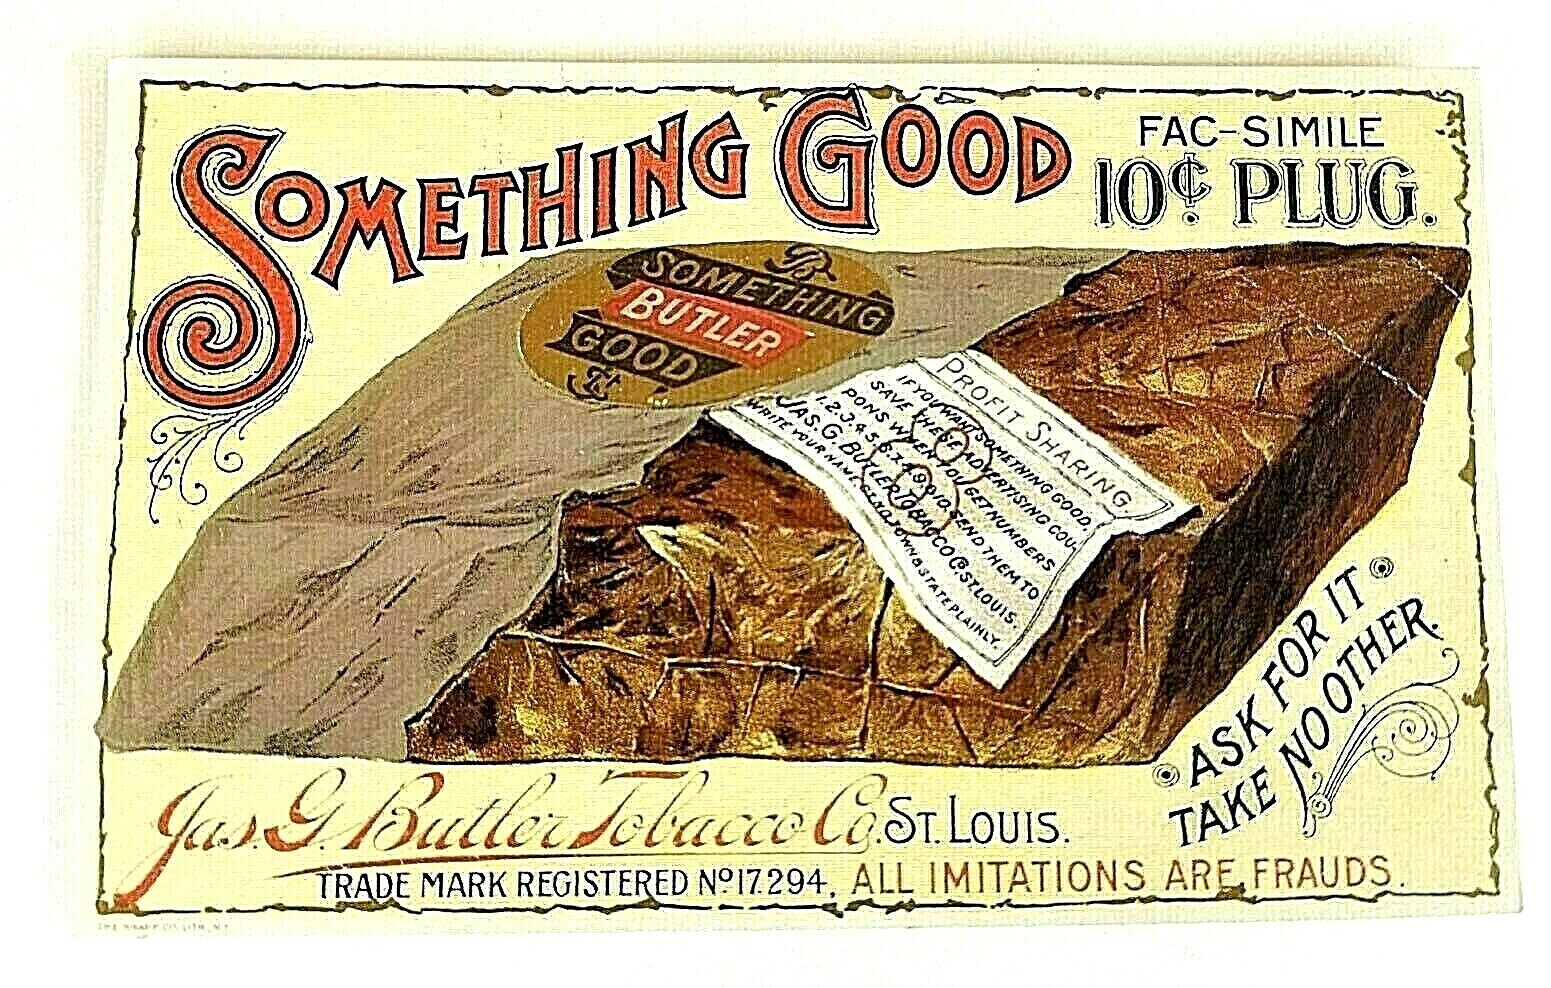 Trade Card Tobacco Something Good Jas G. Butler St. Louis 10 Cent Plug Victorian